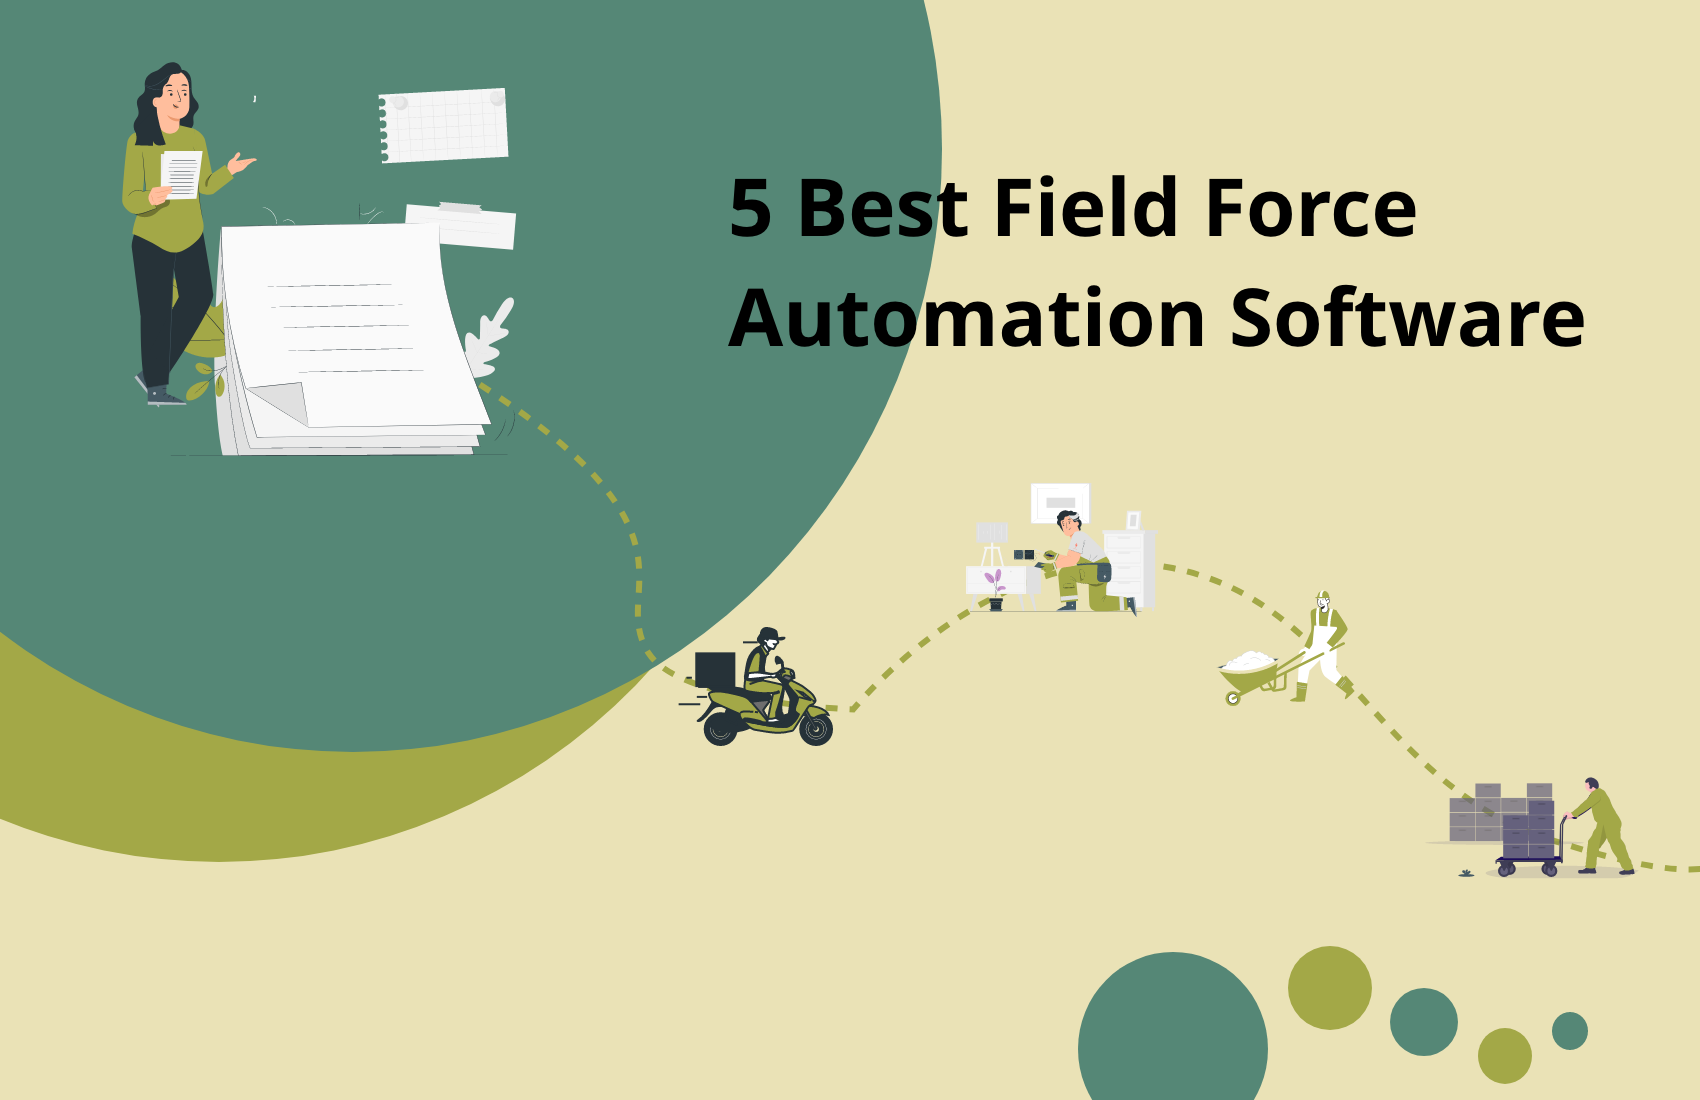 5 Best Field Force Automation Software